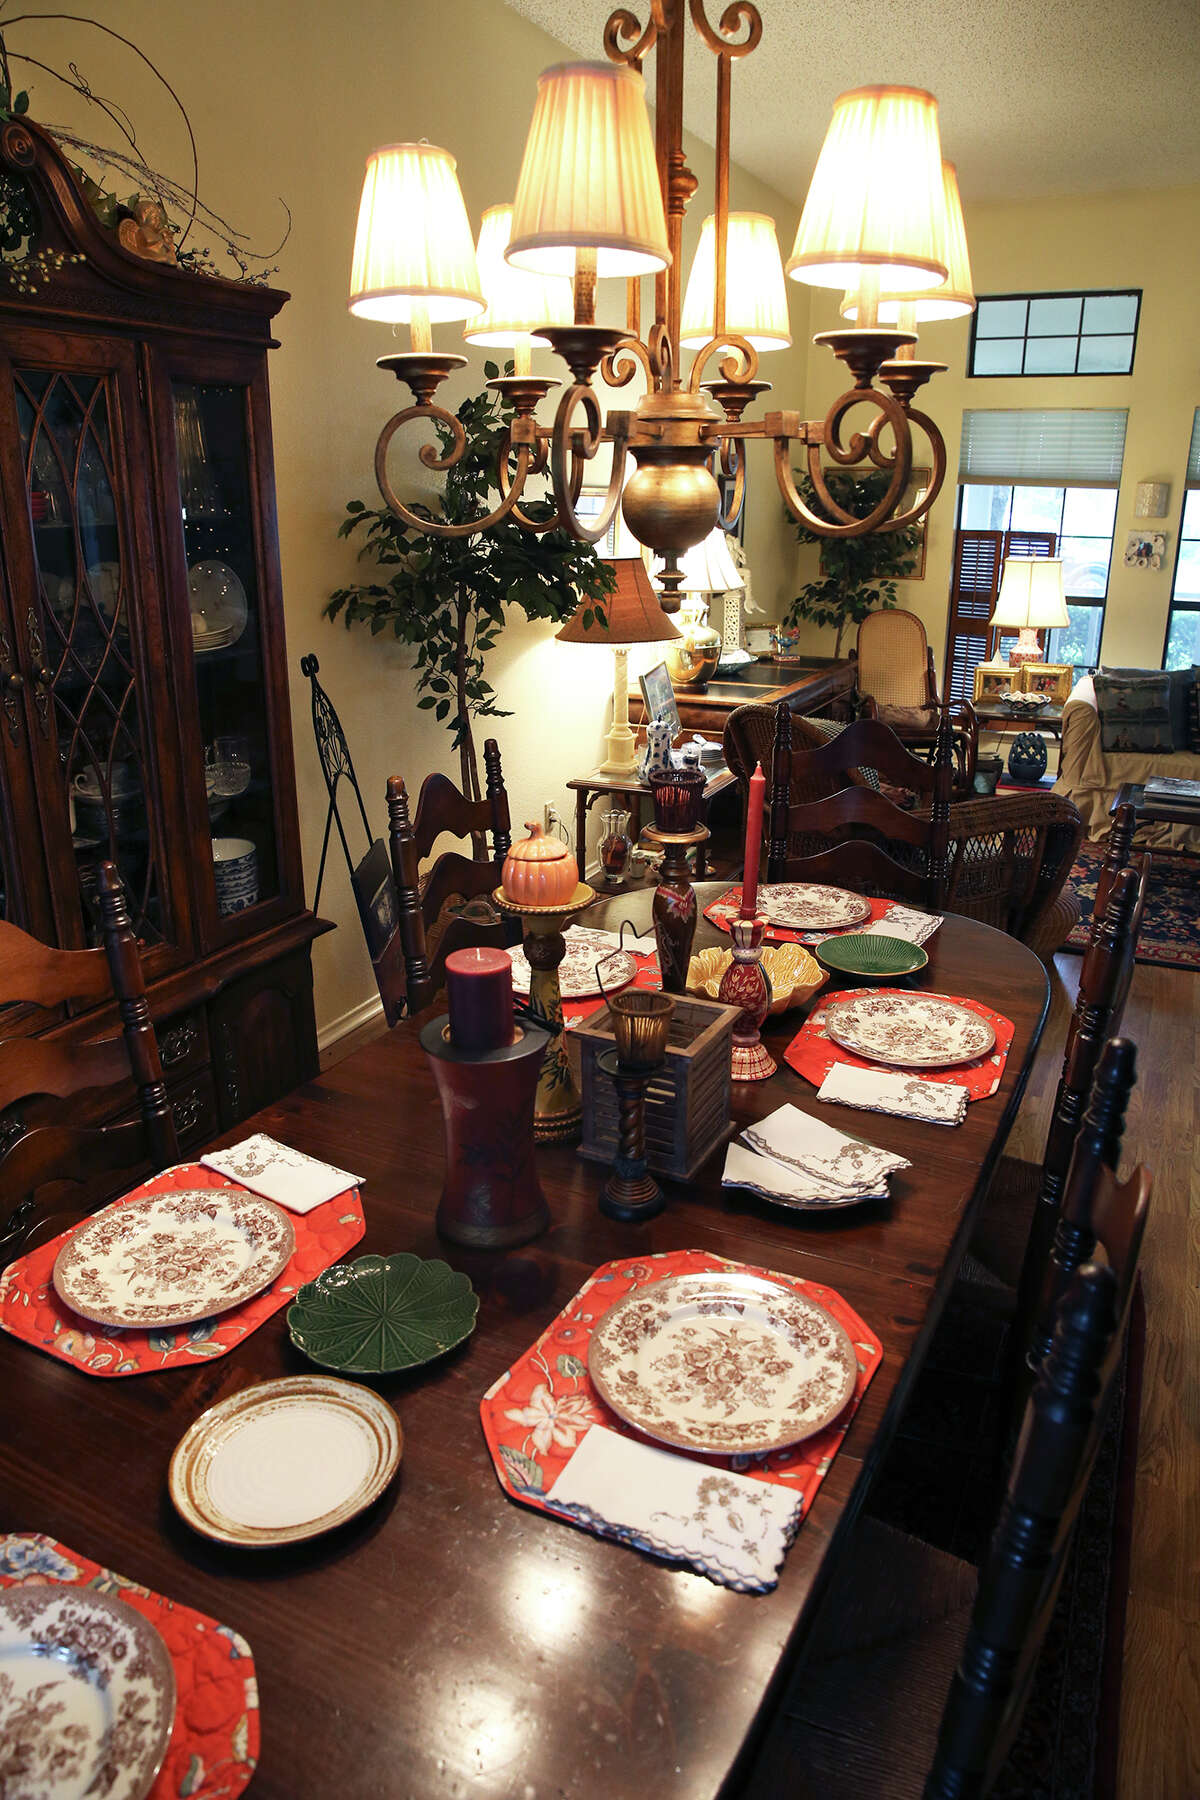 Formal dining room at home of Mary Hays on October 21, 2015.